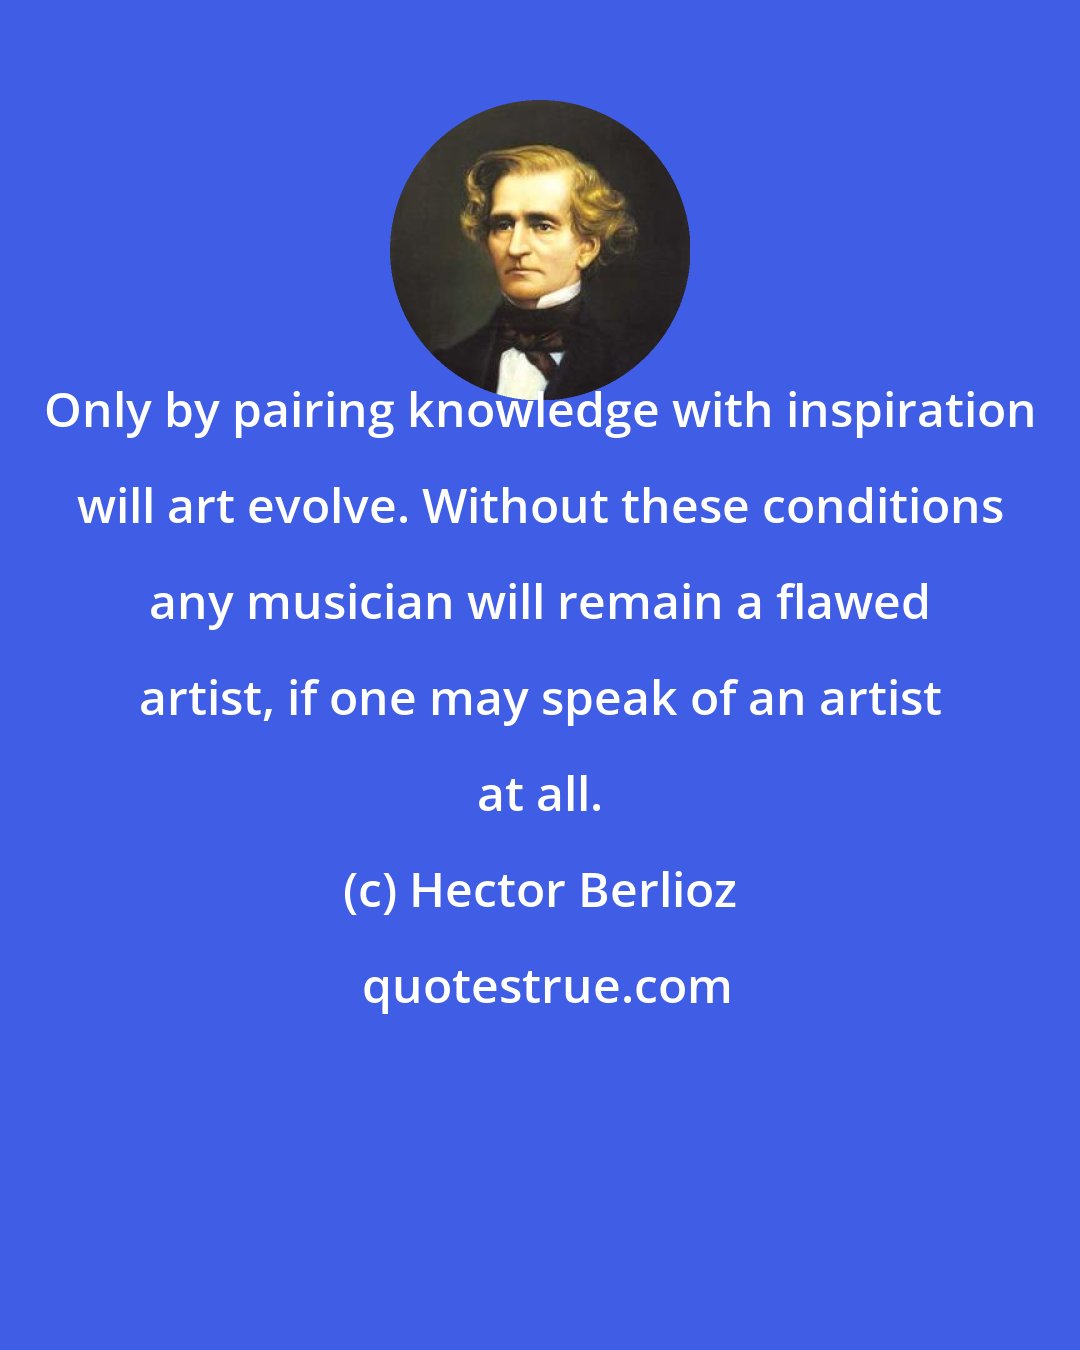 Hector Berlioz: Only by pairing knowledge with inspiration will art evolve. Without these conditions any musician will remain a flawed artist, if one may speak of an artist at all.